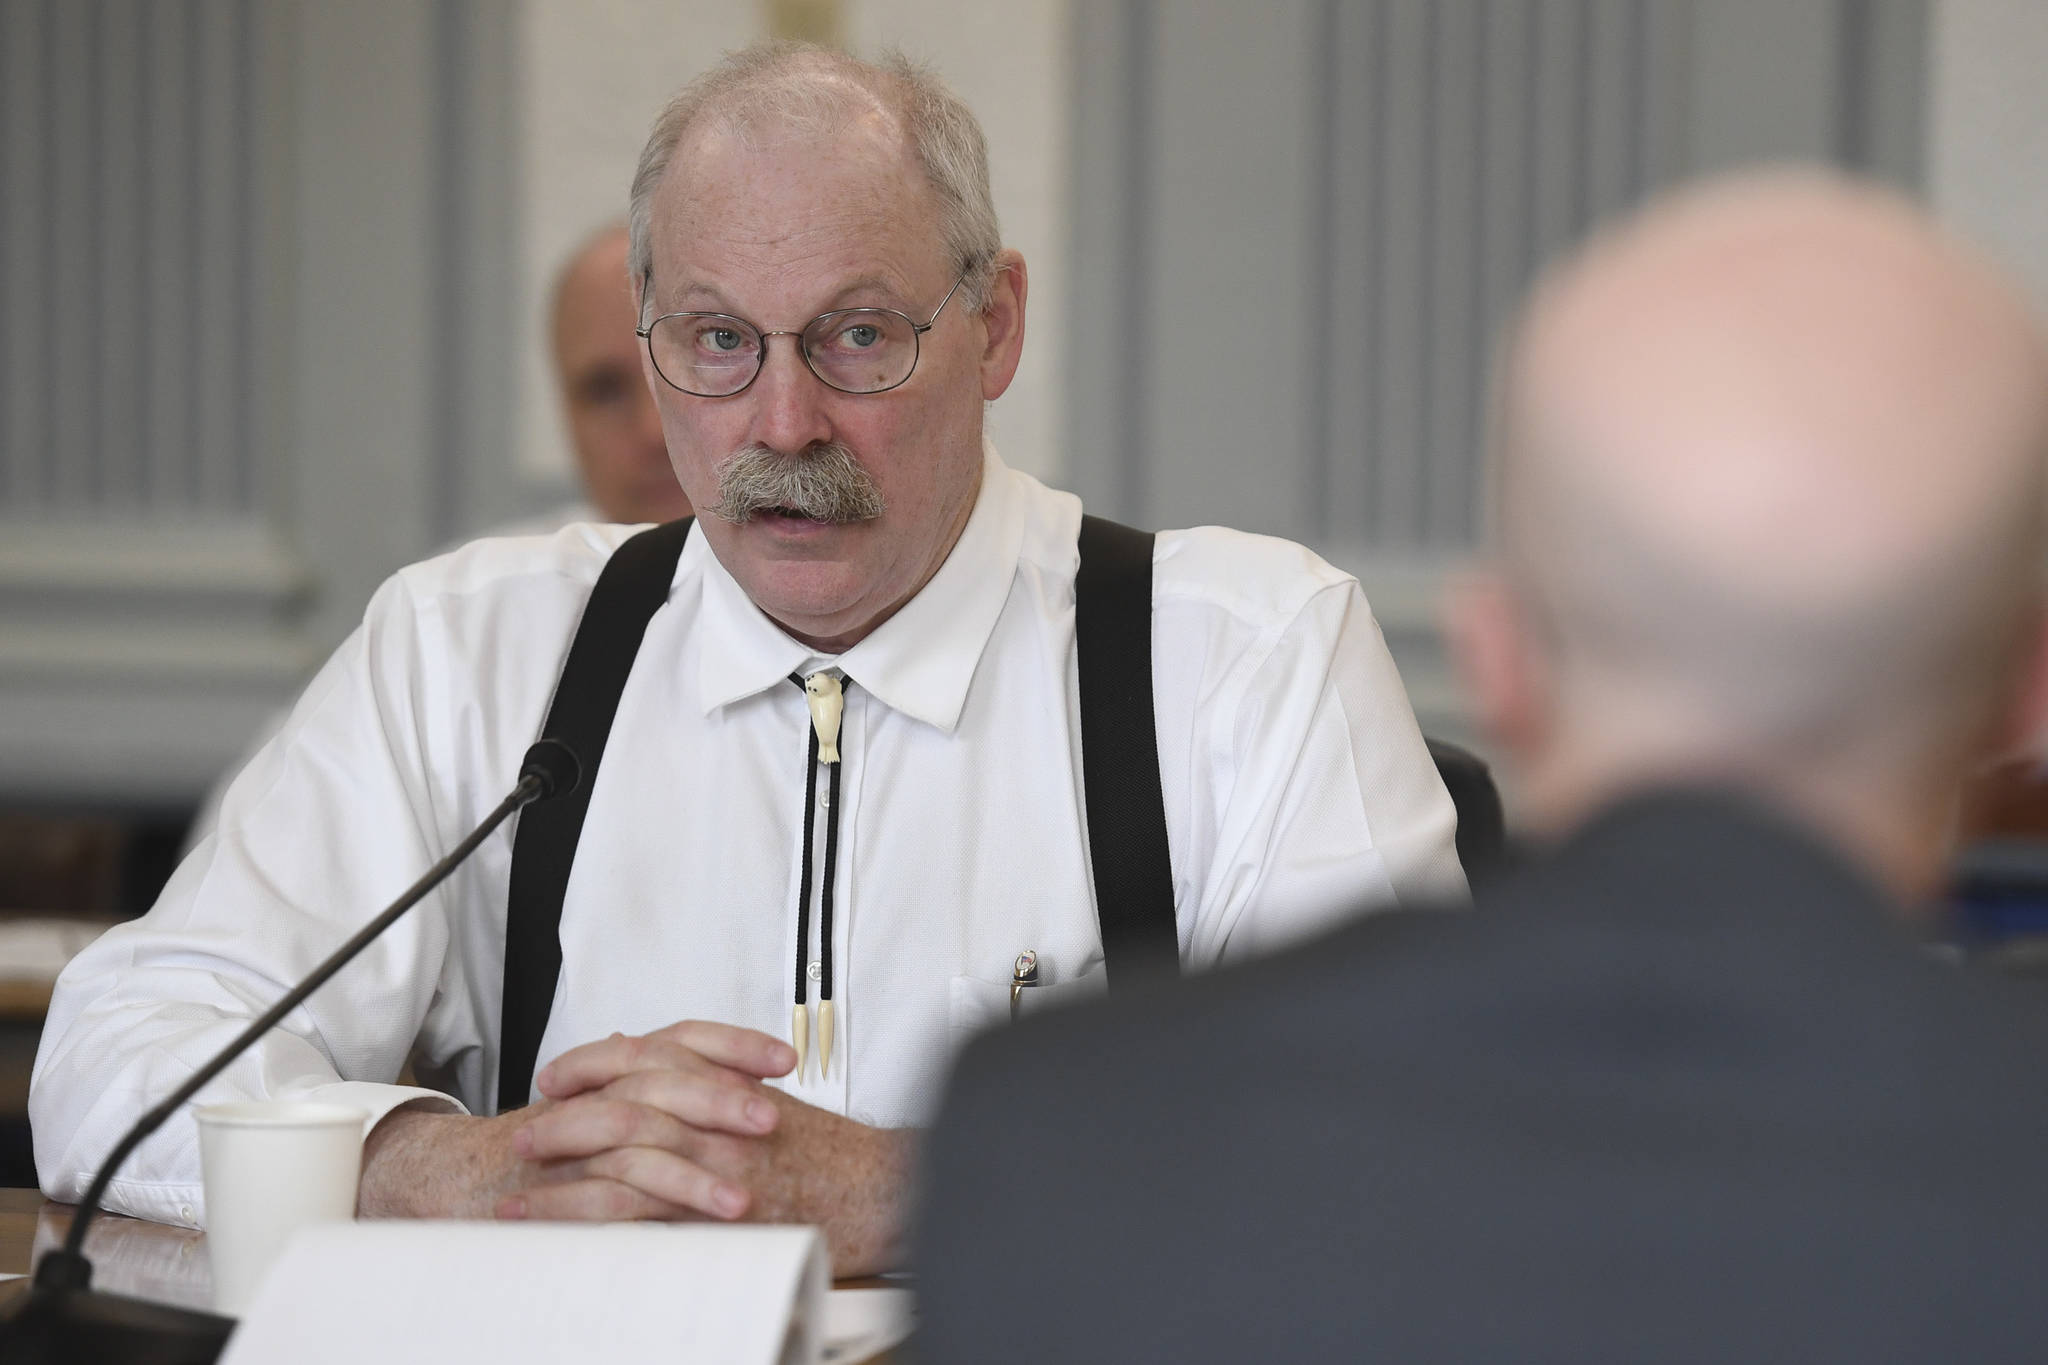 Sen. Bert Stedman, R-Sitka, present one of three papers during a Bicameral Permanent Fund Working Group at the Capitol on Monday, July 8, 2019. (Michael Penn | Juneau Empire)